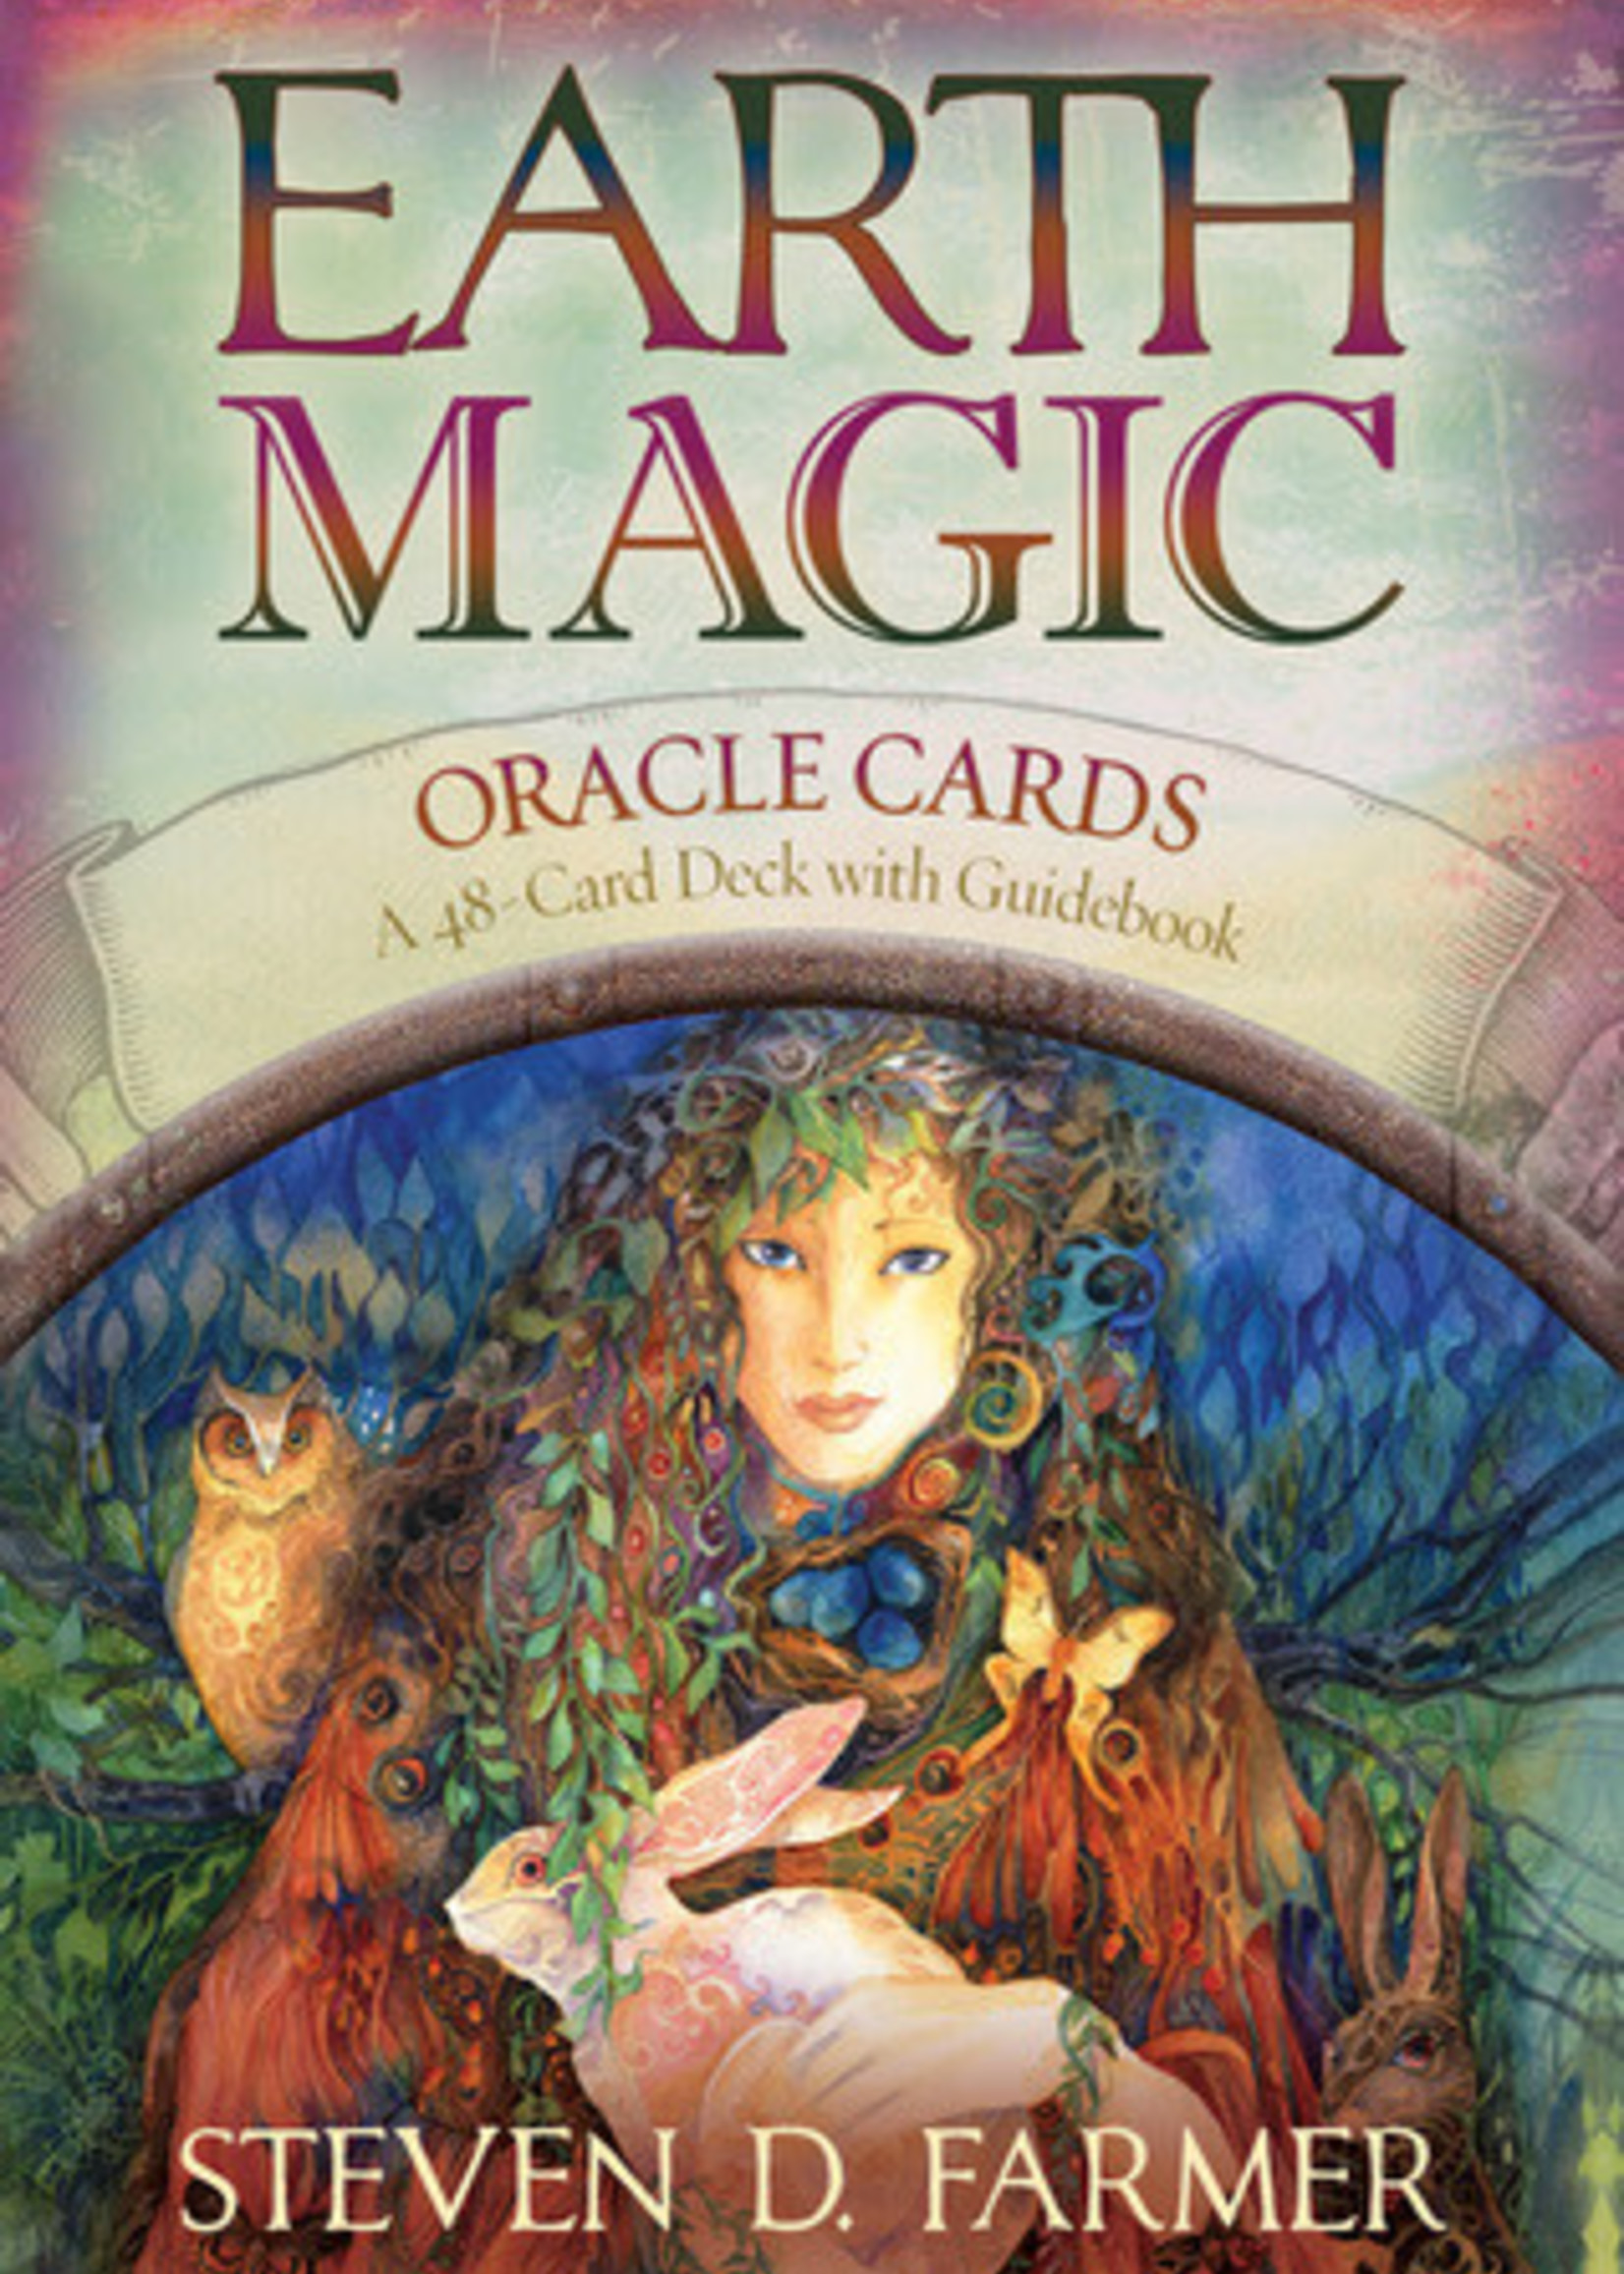 Earth Magic Oracle Cards: A 48-Card Deck and Guidebook by Steven D. Farmer